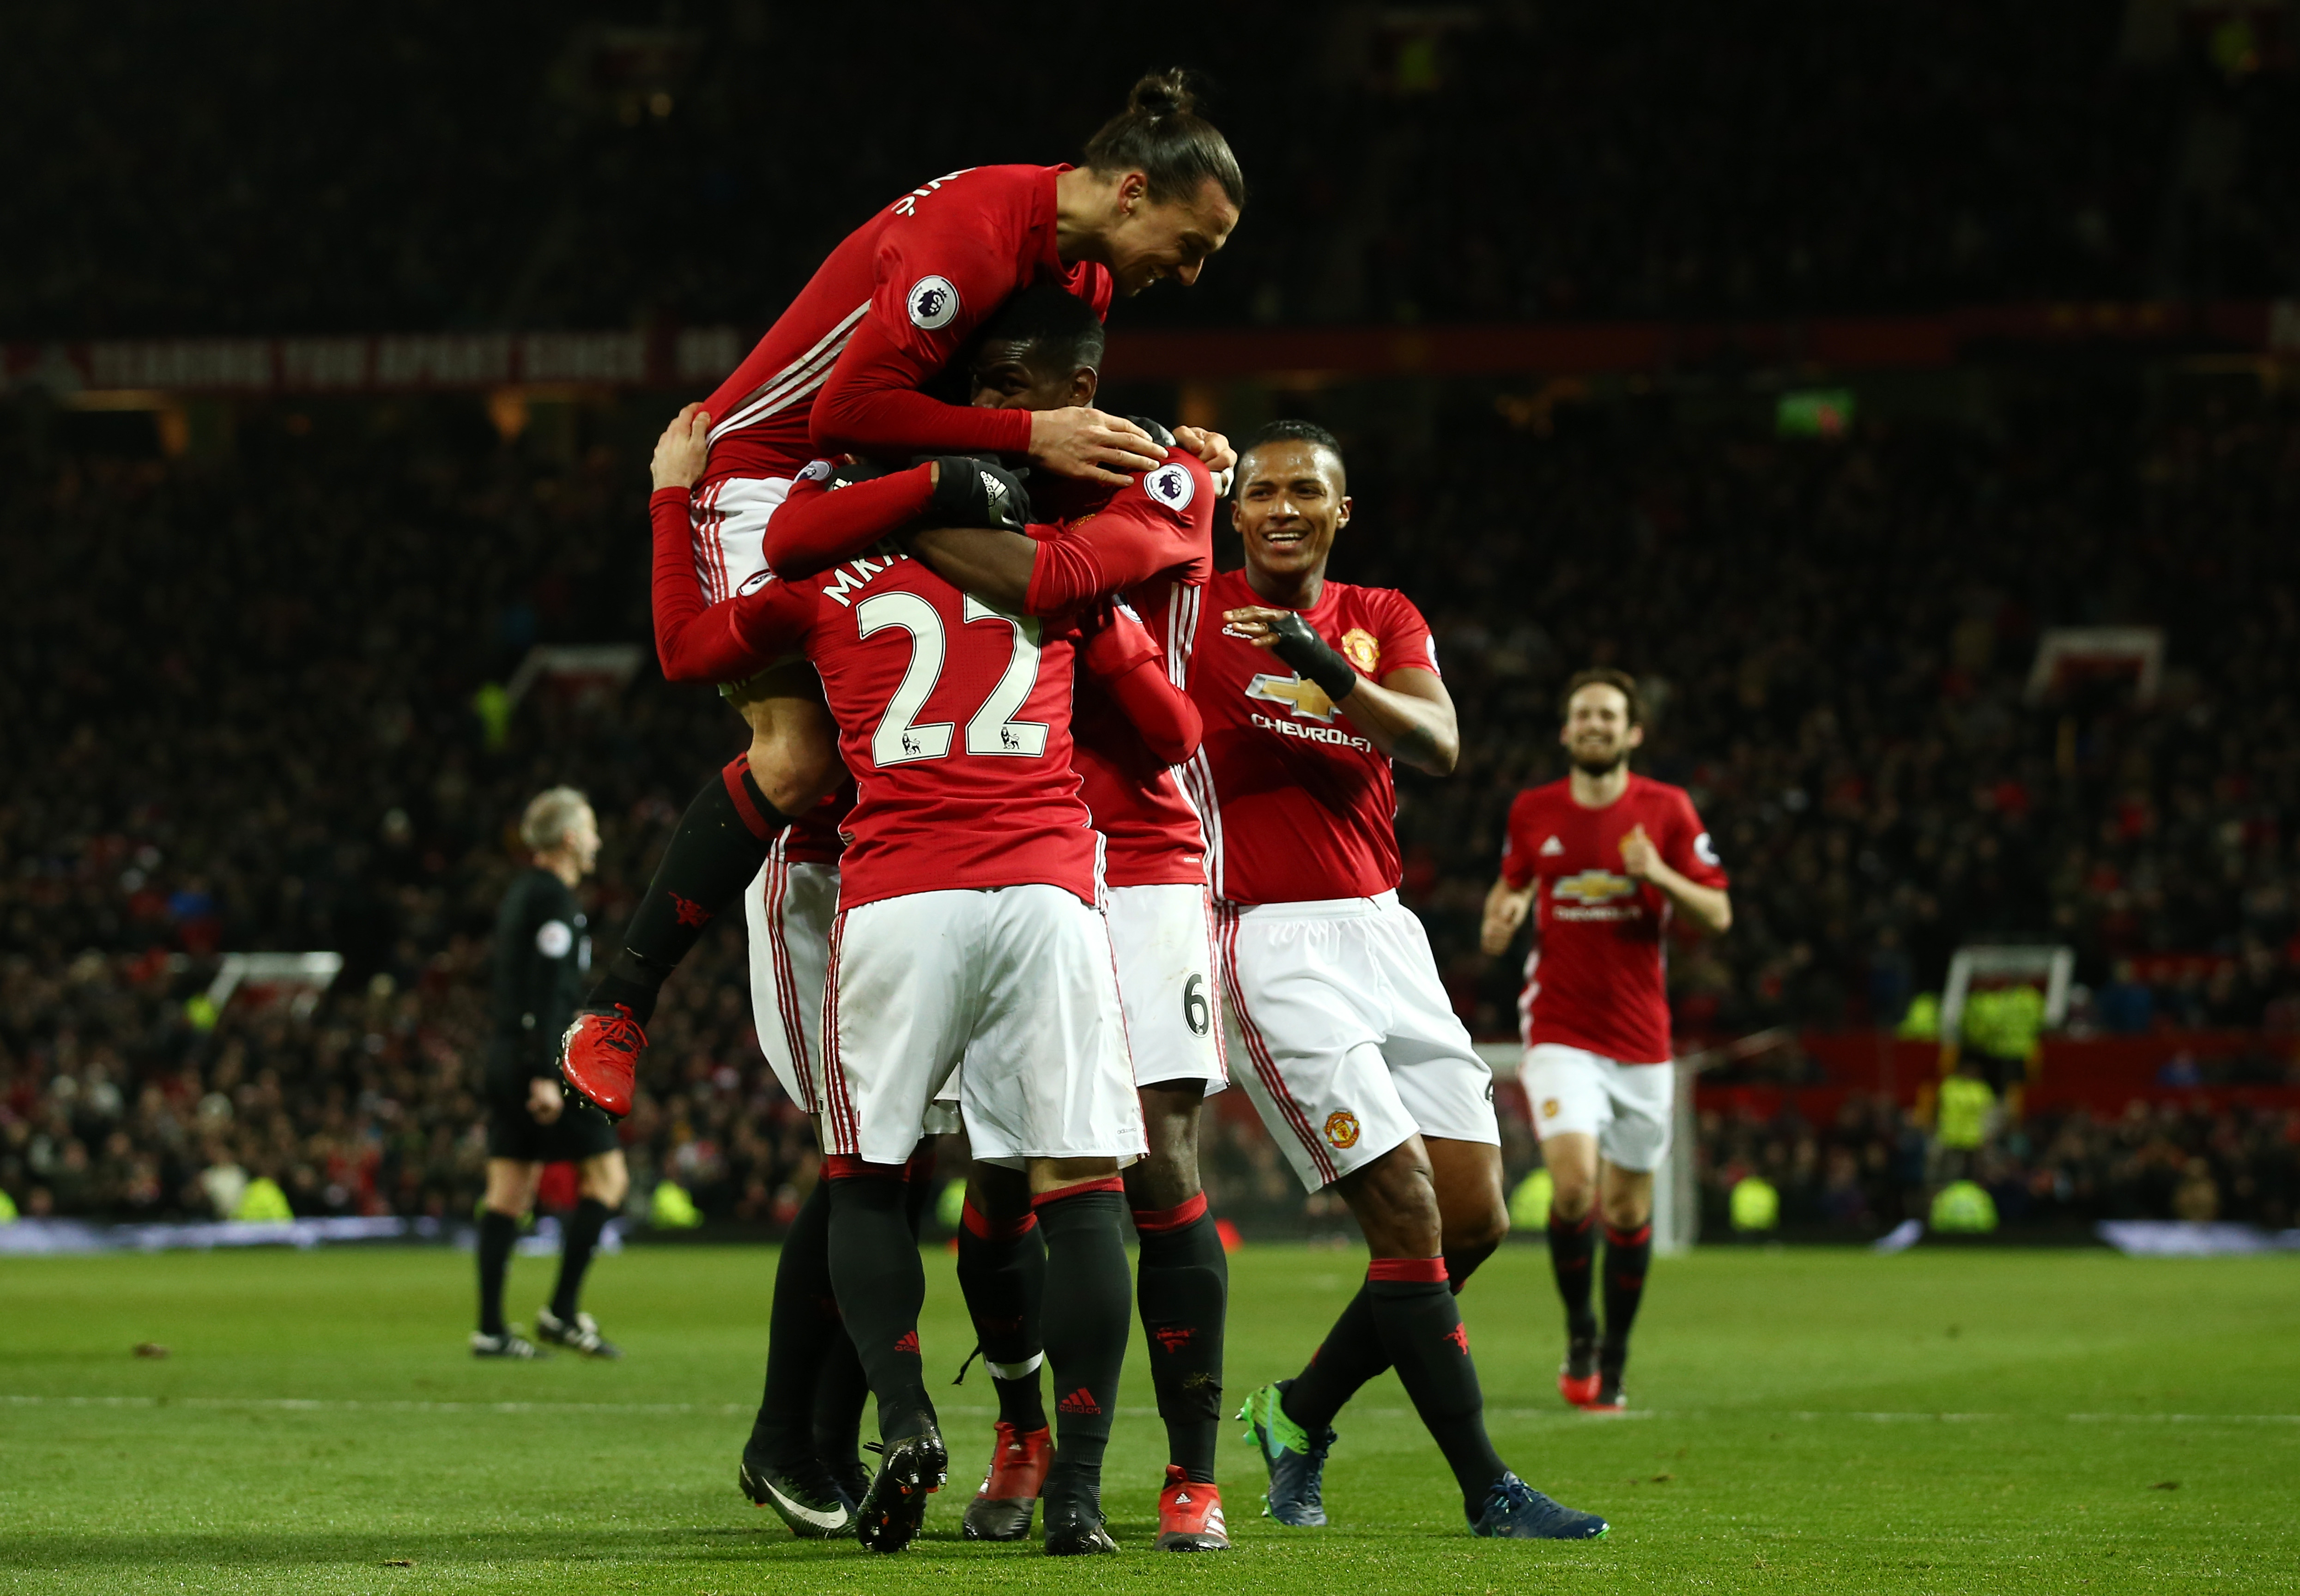 MANCHESTER, ENGLAND - DECEMBER 26:  Henrikh Mkhitaryan #22 of Manchester United celebrates with teammates after scoring his team's third goal during the Premier League match between Manchester United and Sunderland at Old Trafford on December 26, 2016 in Manchester, England.  (Photo by Jan Kruger/Getty Images)